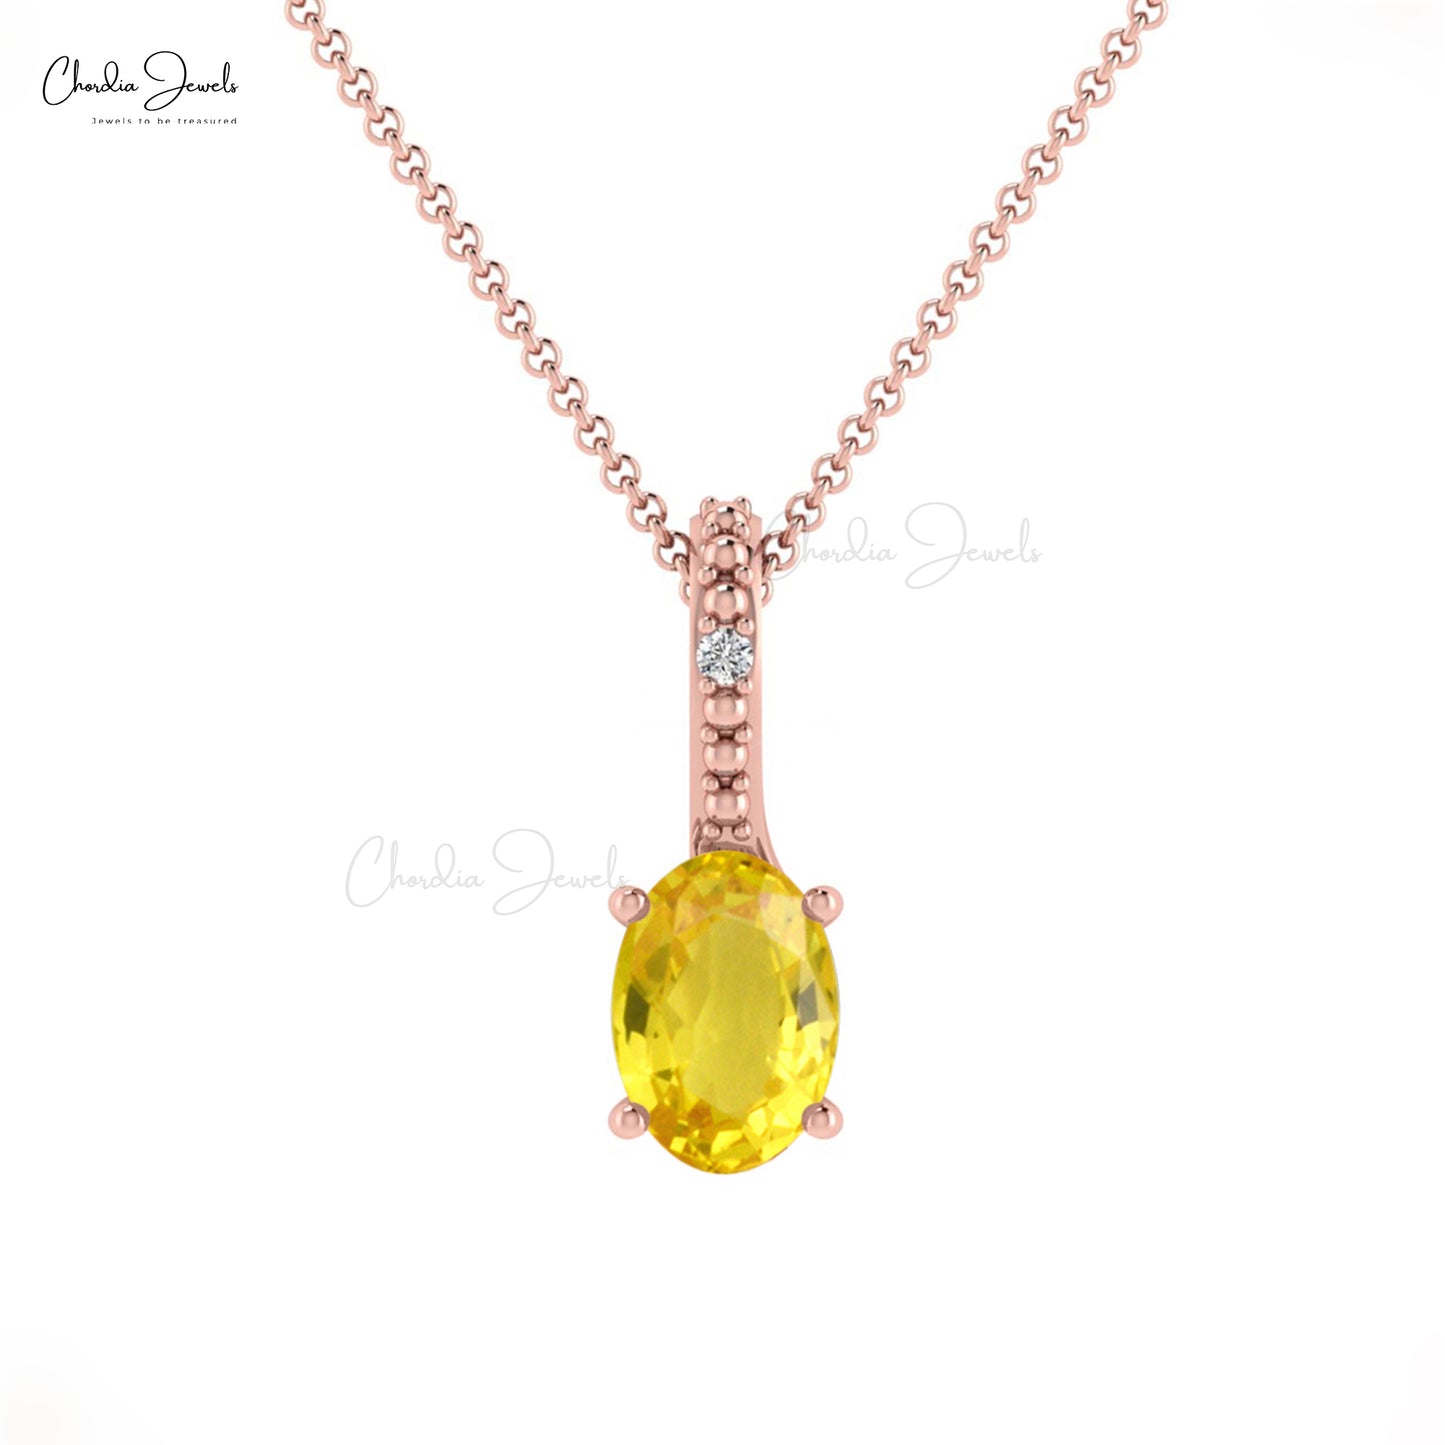 Load image into Gallery viewer, Trendy New Design Natural White Diamond Hidden Bail Pendant Necklace Oval Shape Yellow Sapphire Gemstone Charms Pendant in 14k Pure Gold Gift For Her
